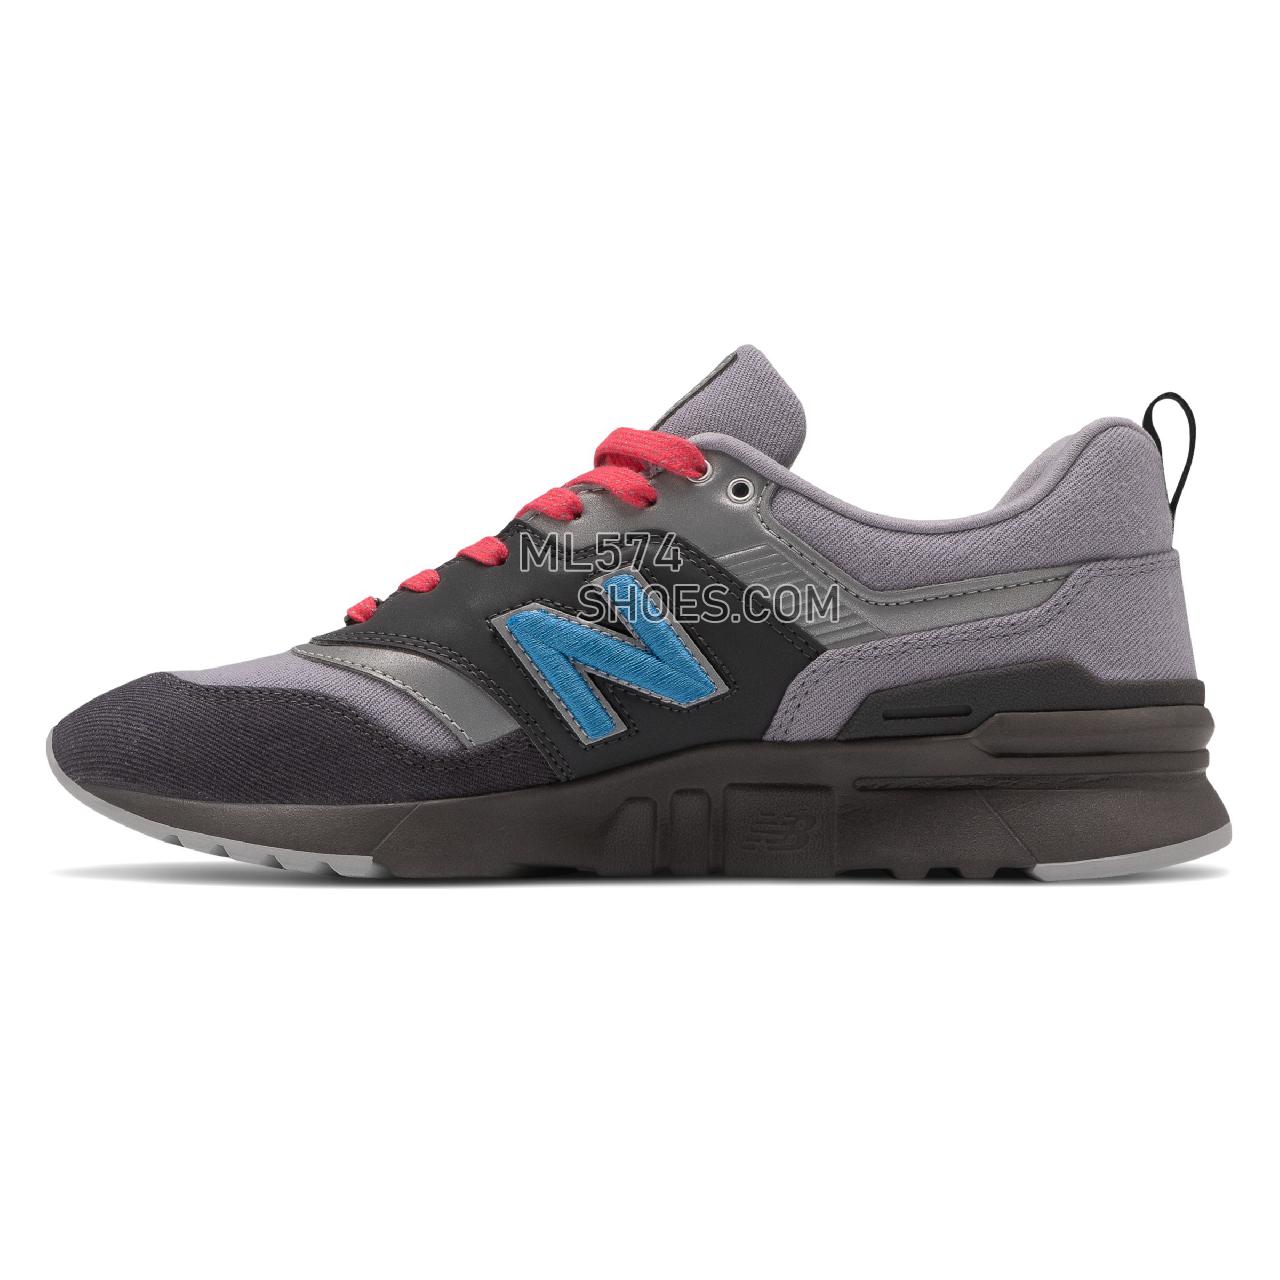 New Balance 997H New Era - Men's Classic Sneakers - Magnet with Red - CM997HNE